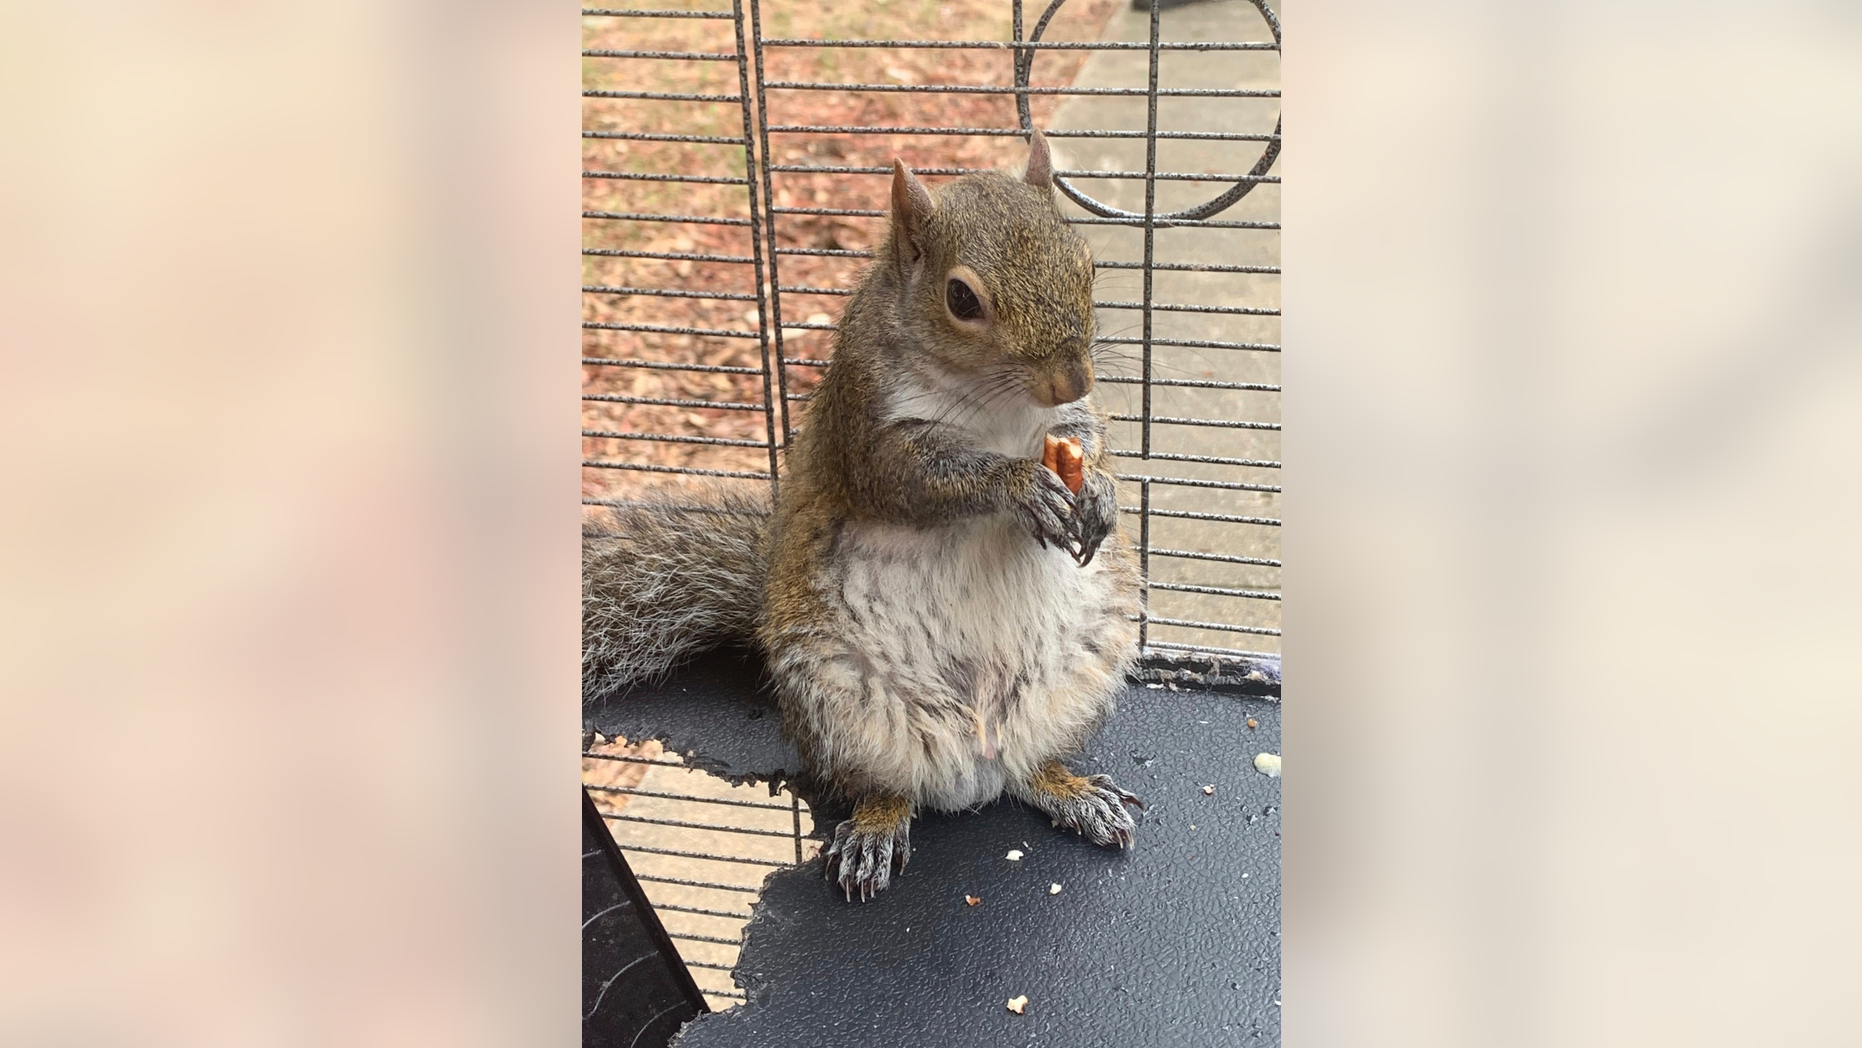 In this June 2019 photo released by the Limestone County Sheriff's Office, a squirrel is shown in a cage, in Ala. Alabama investigators say a man kept the caged 